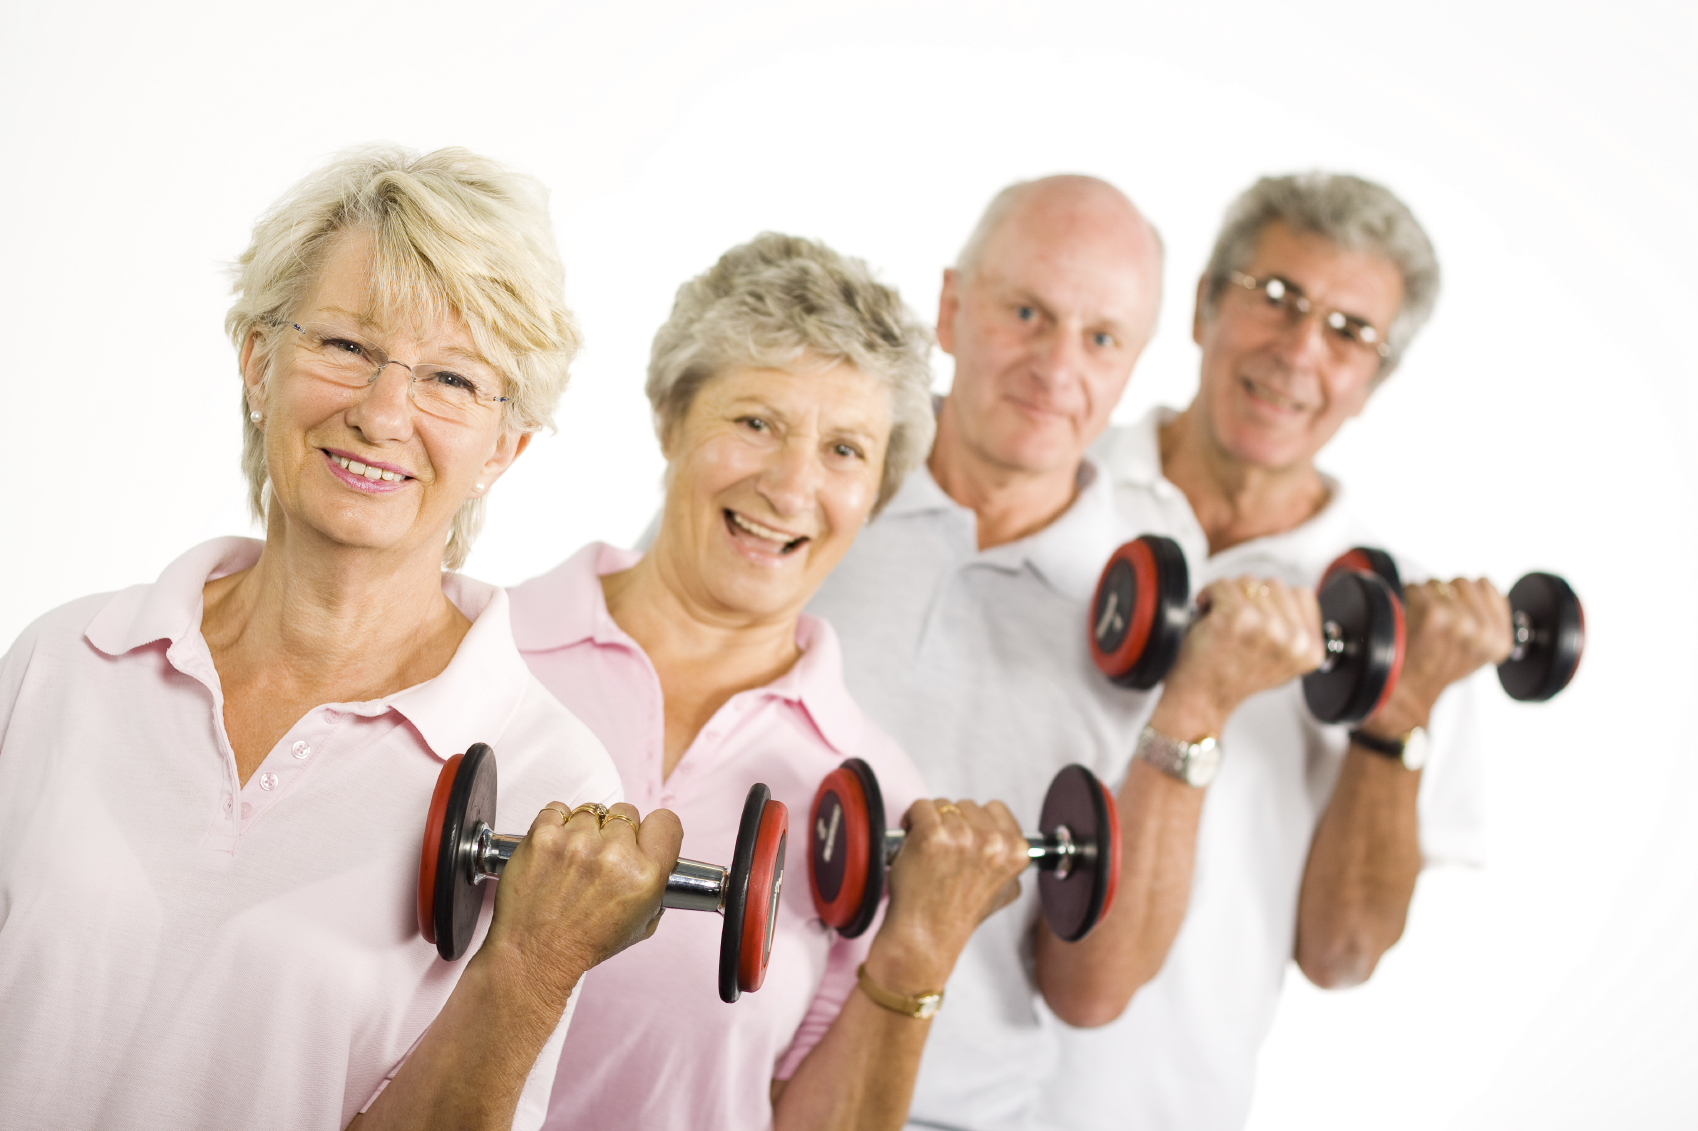 Exercise for preventing osteoporosis